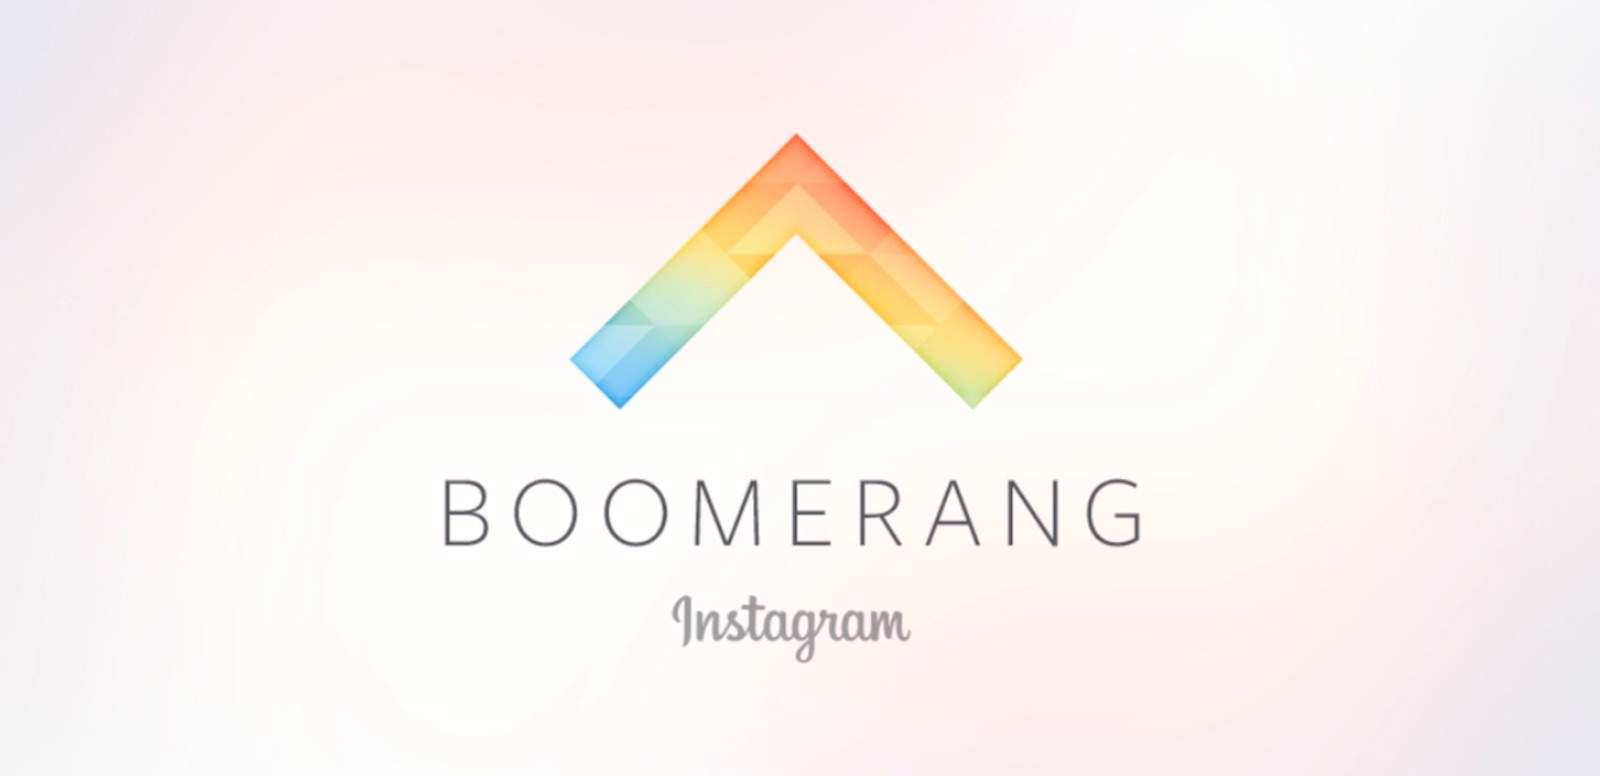 Boomerang is just like Live Photos.